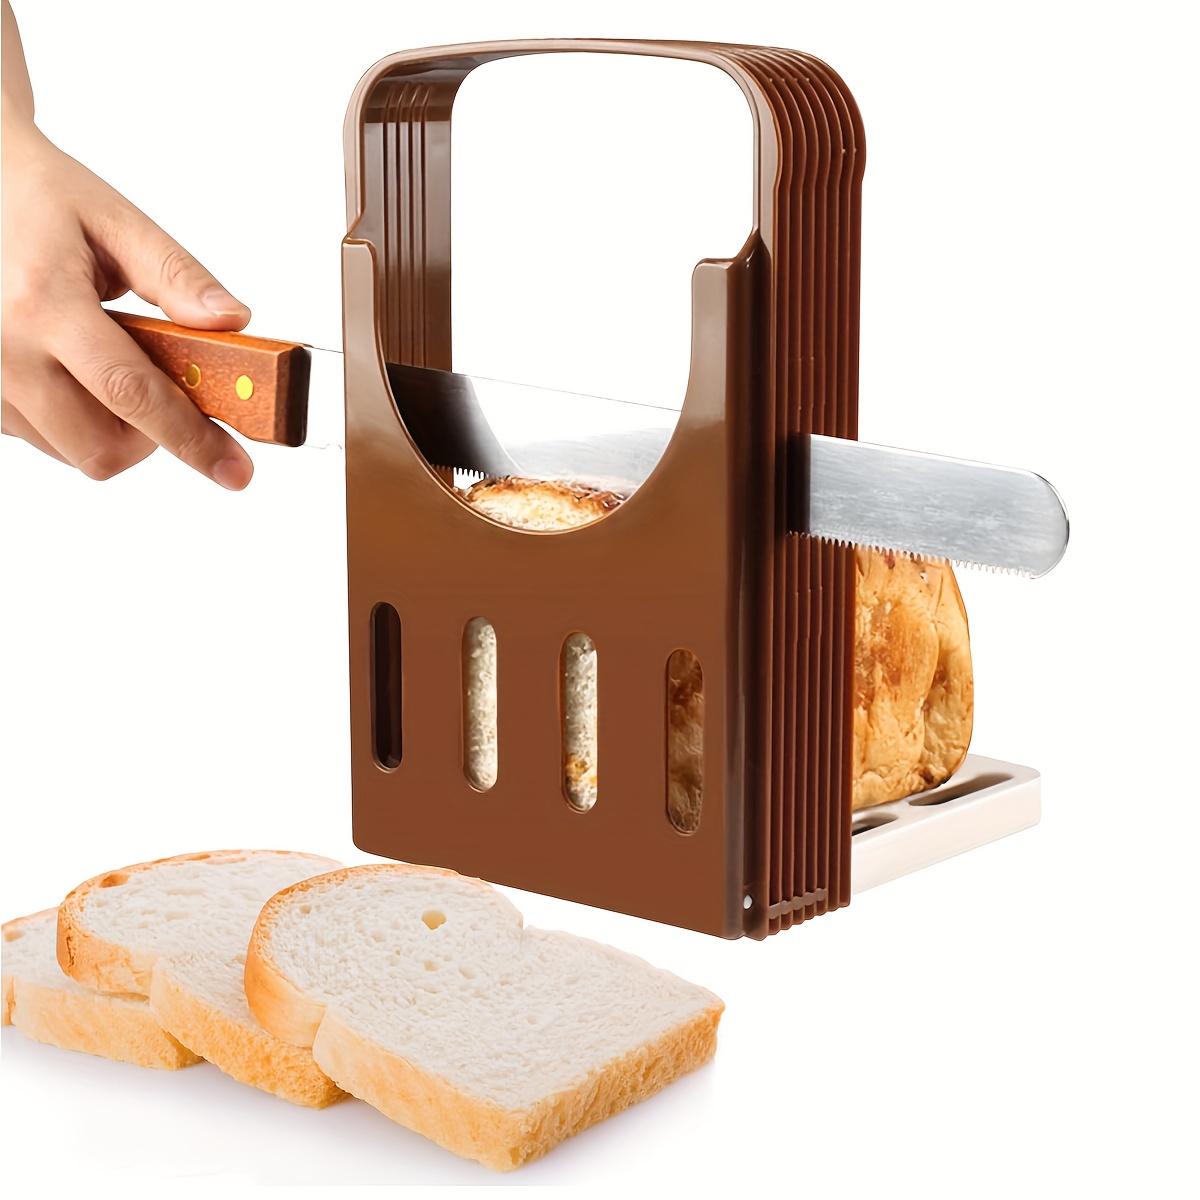 Bread slicers - high-quality bread slicers made in Germany